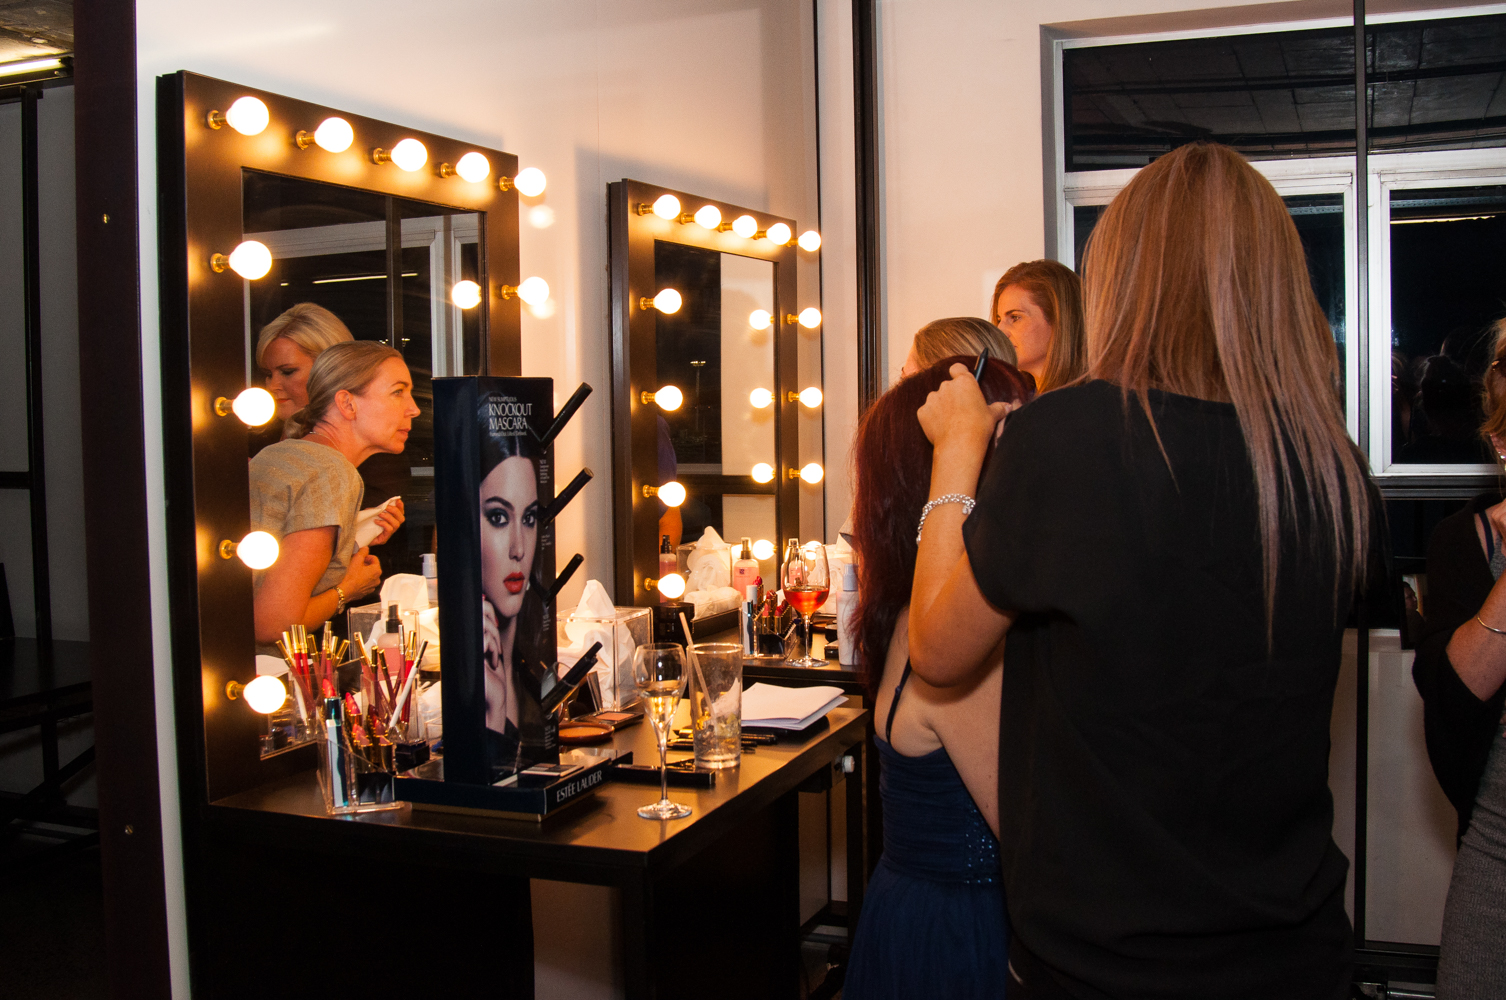 Guests were treated to makeup touch-ups from the talented Estée Lauder team.